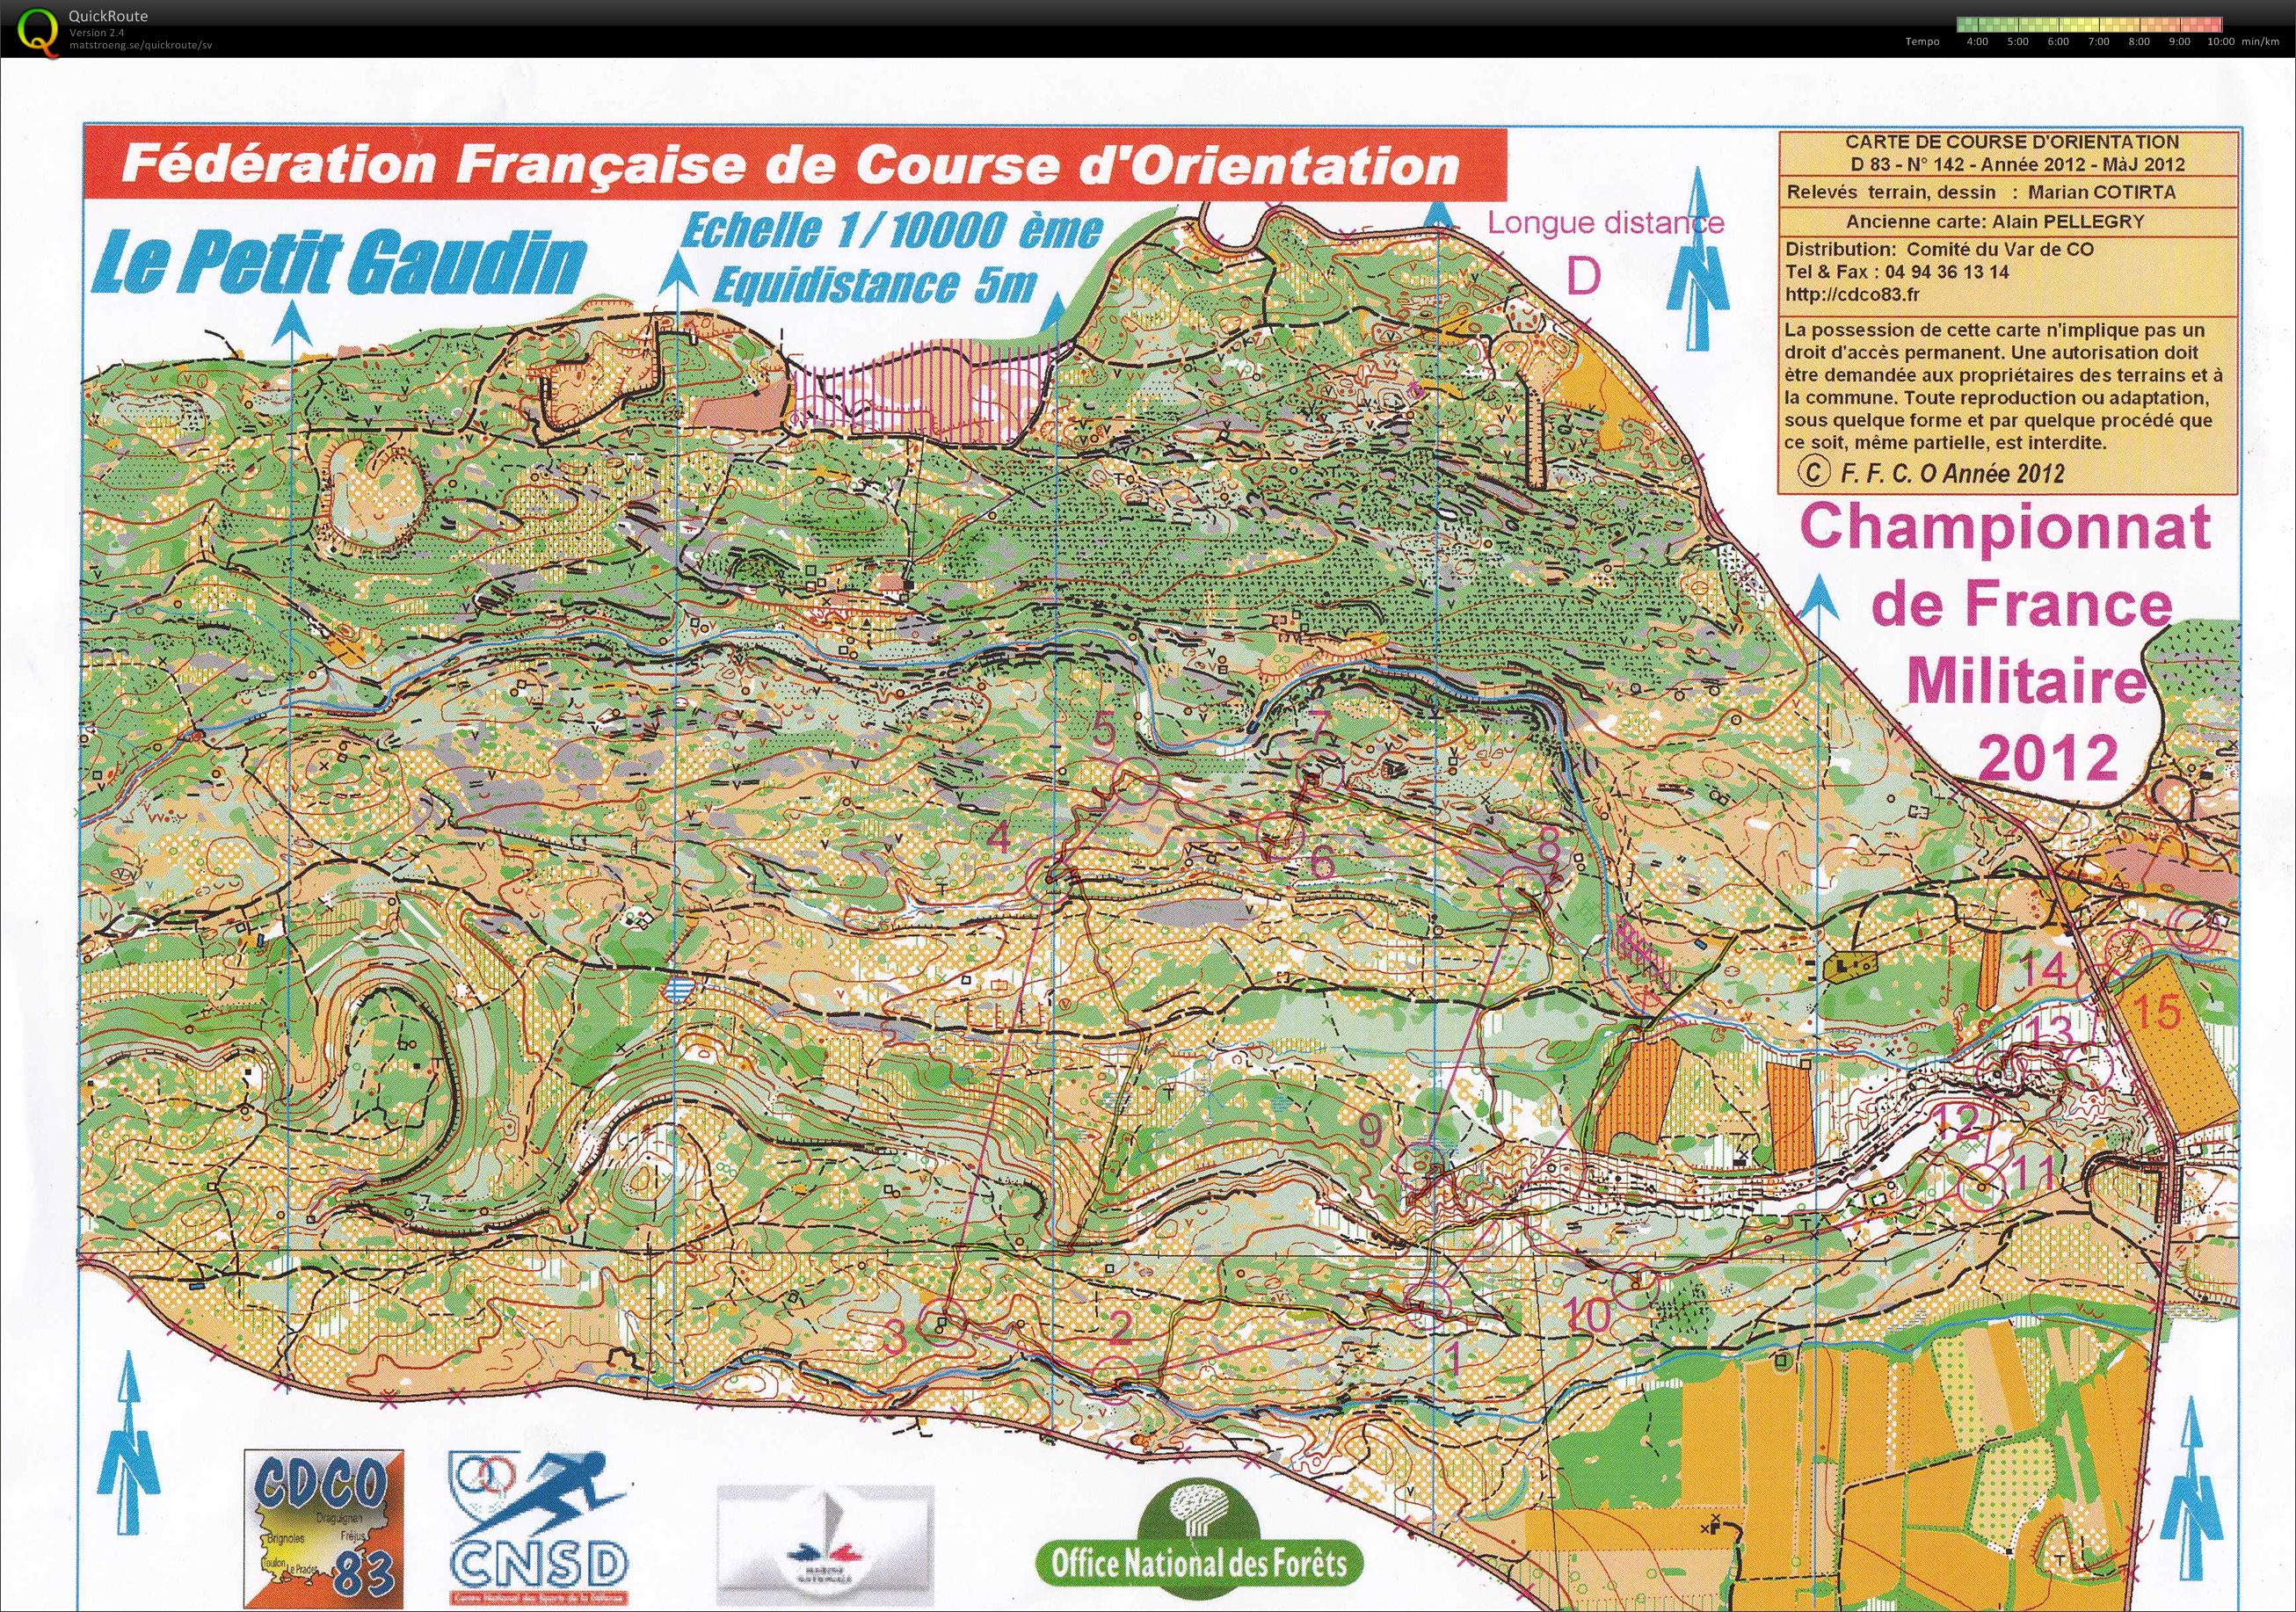 Open race after French Military long dist champ H60 (2012-05-11)